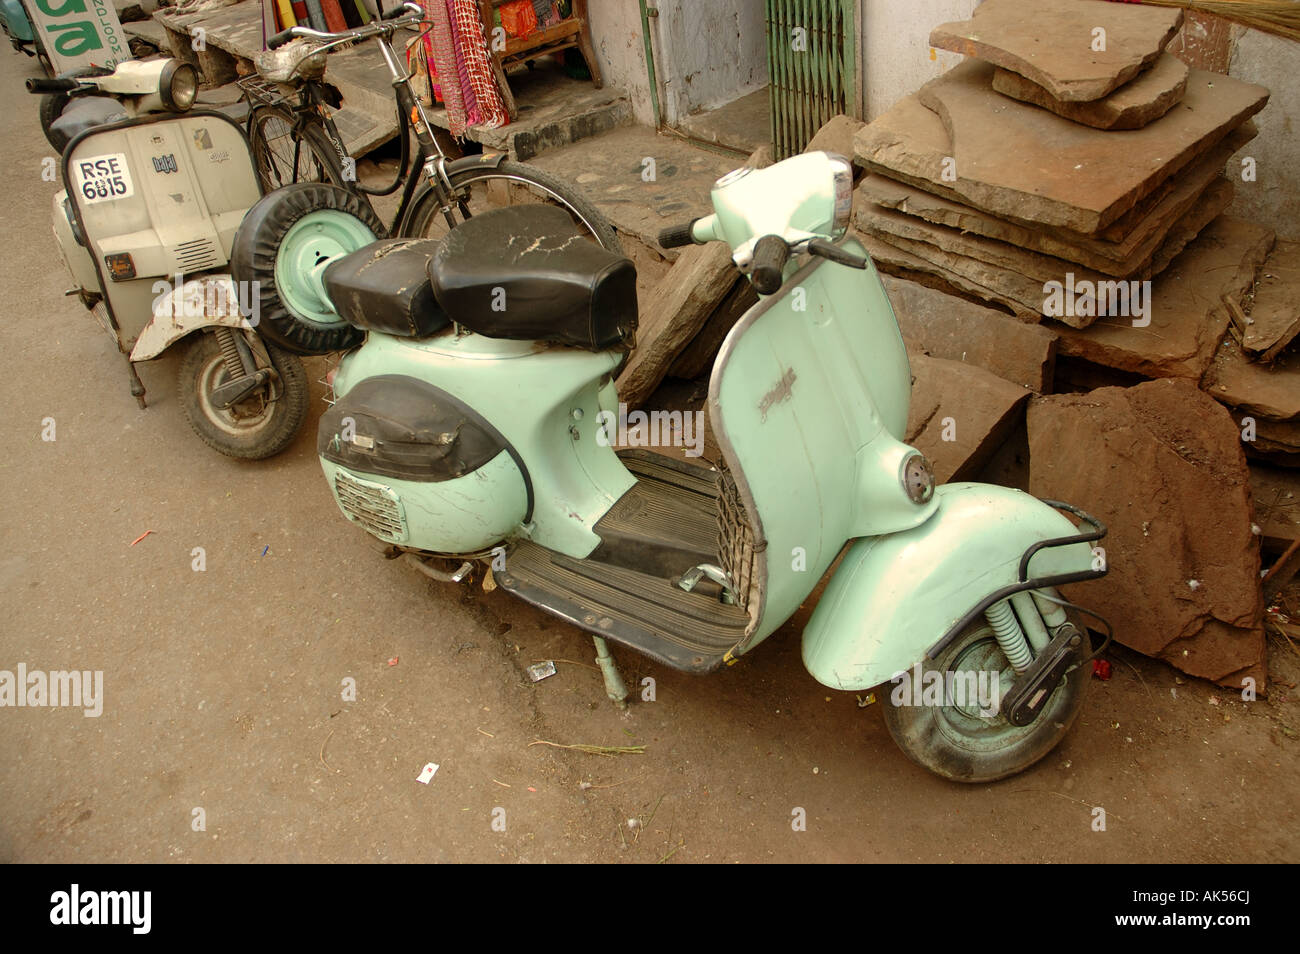 old scooters